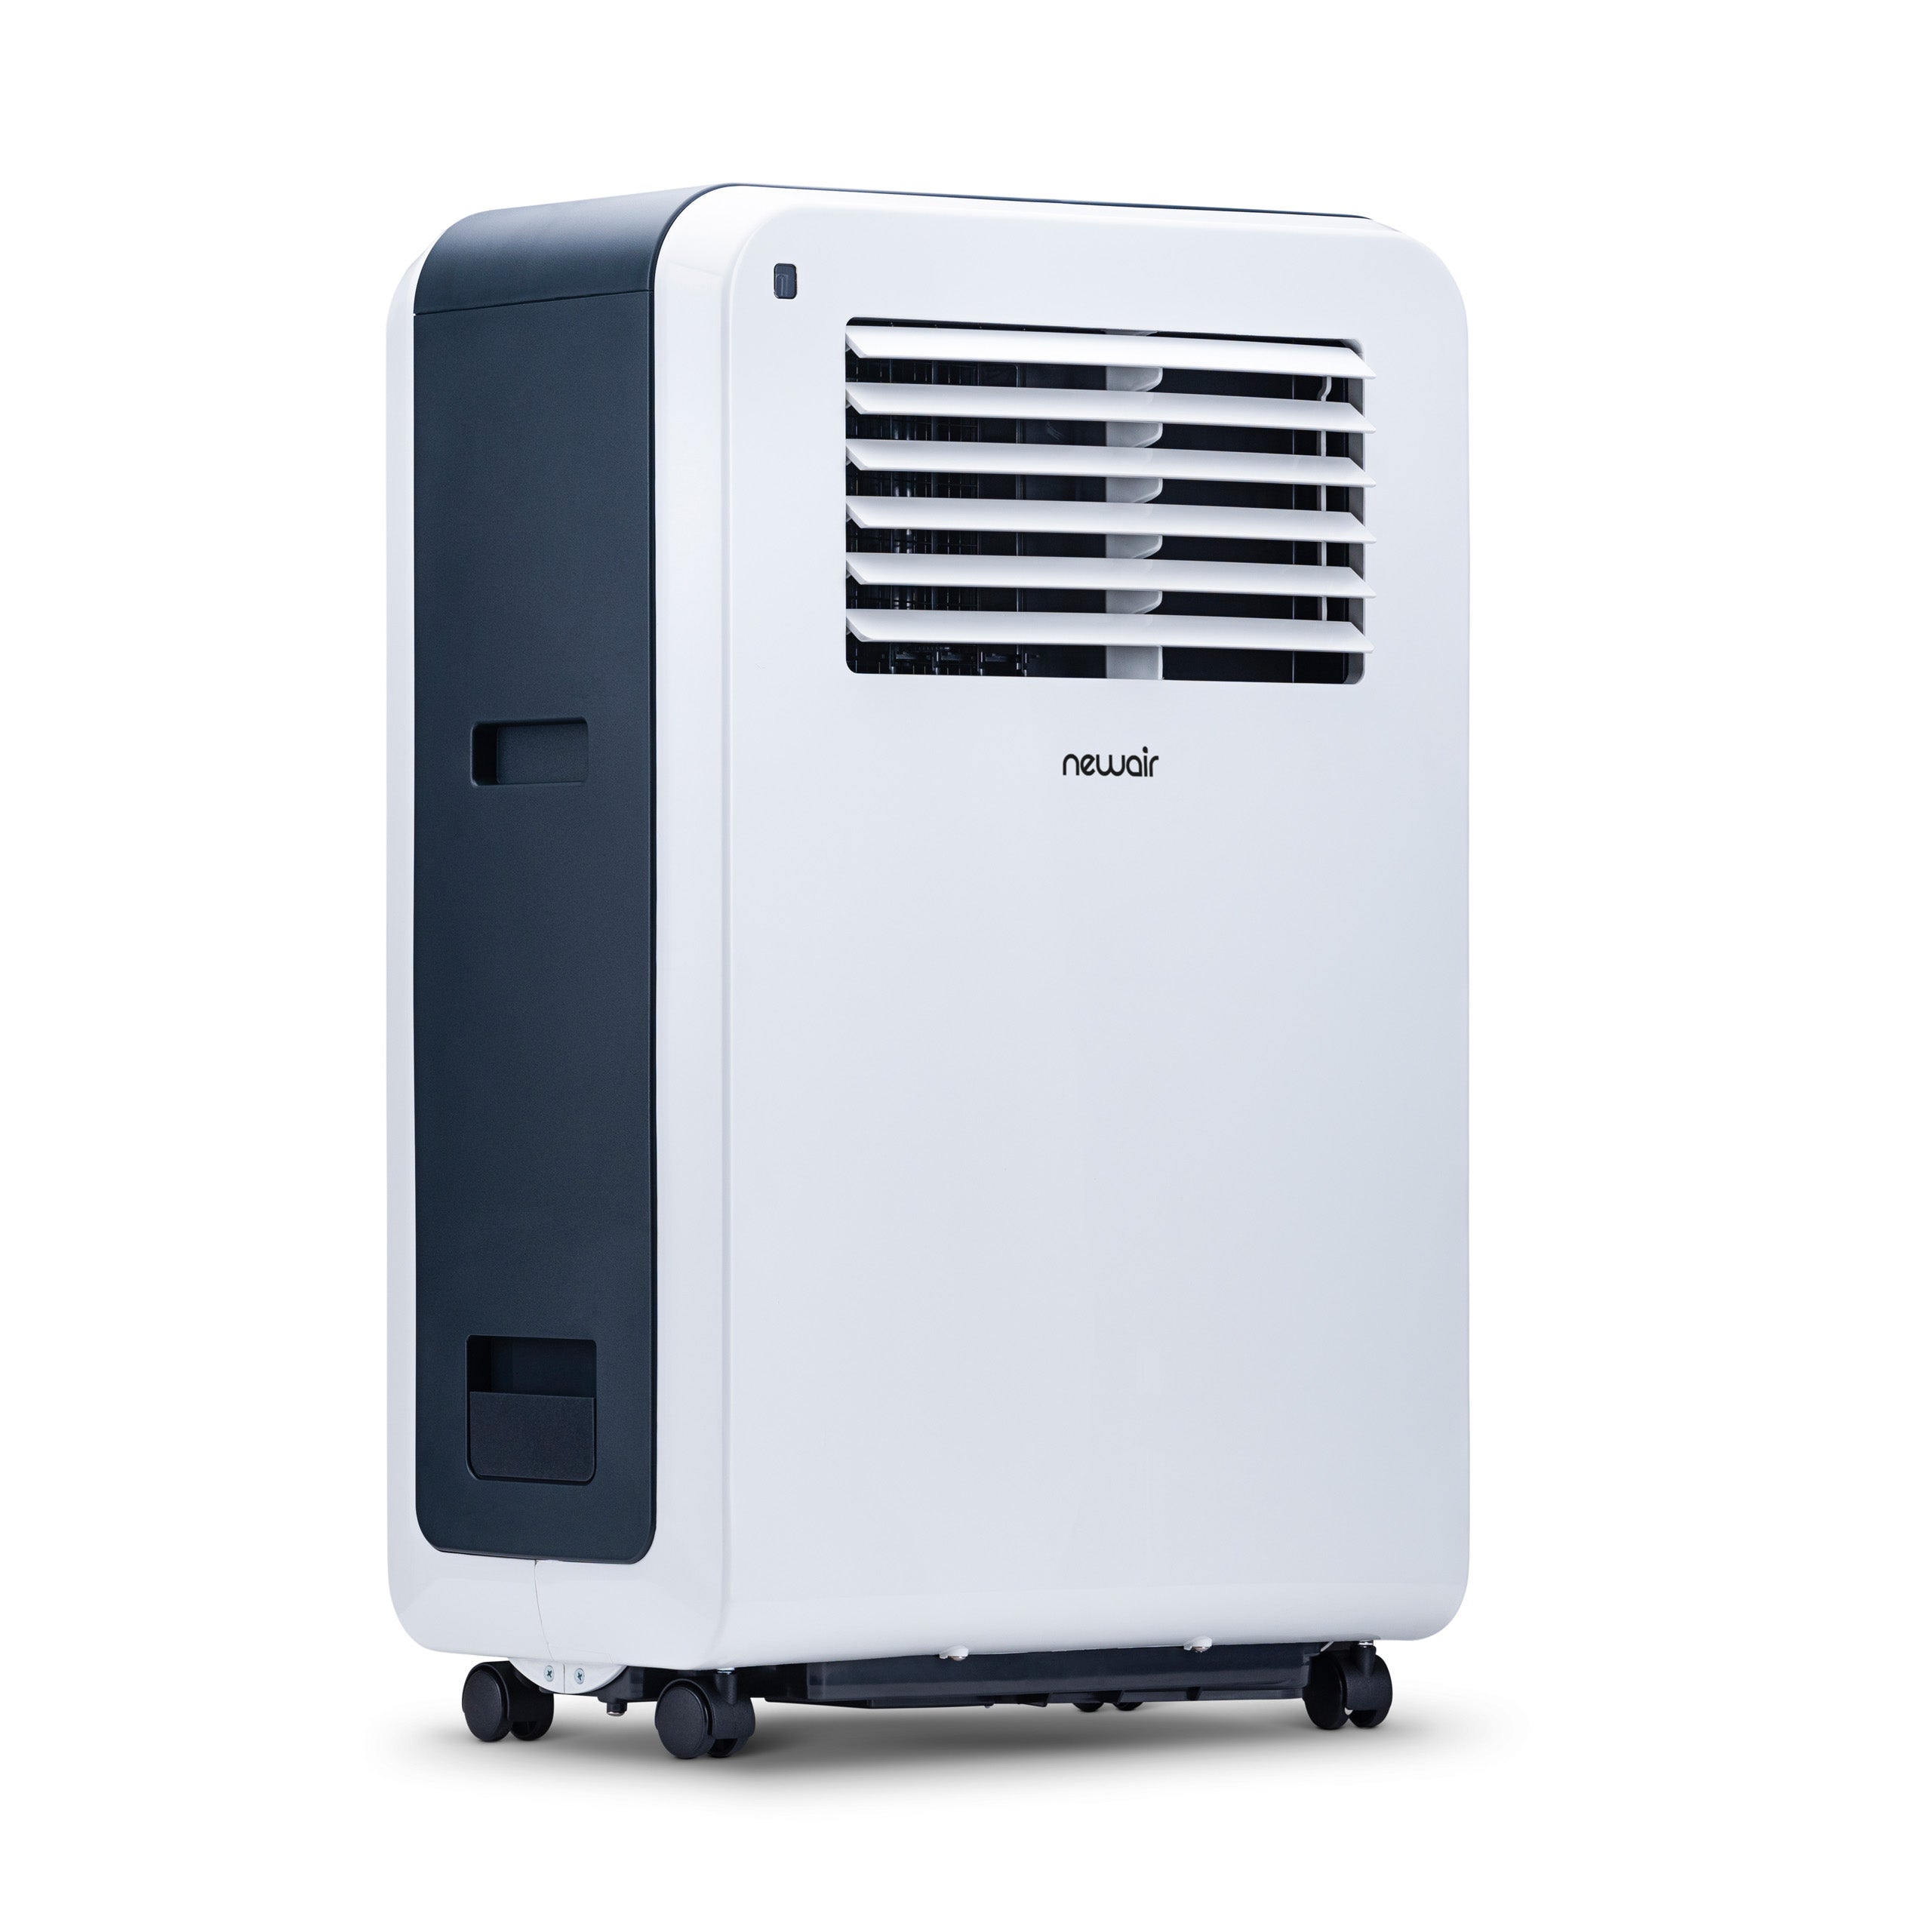 toshiba portable air conditioner not cooling